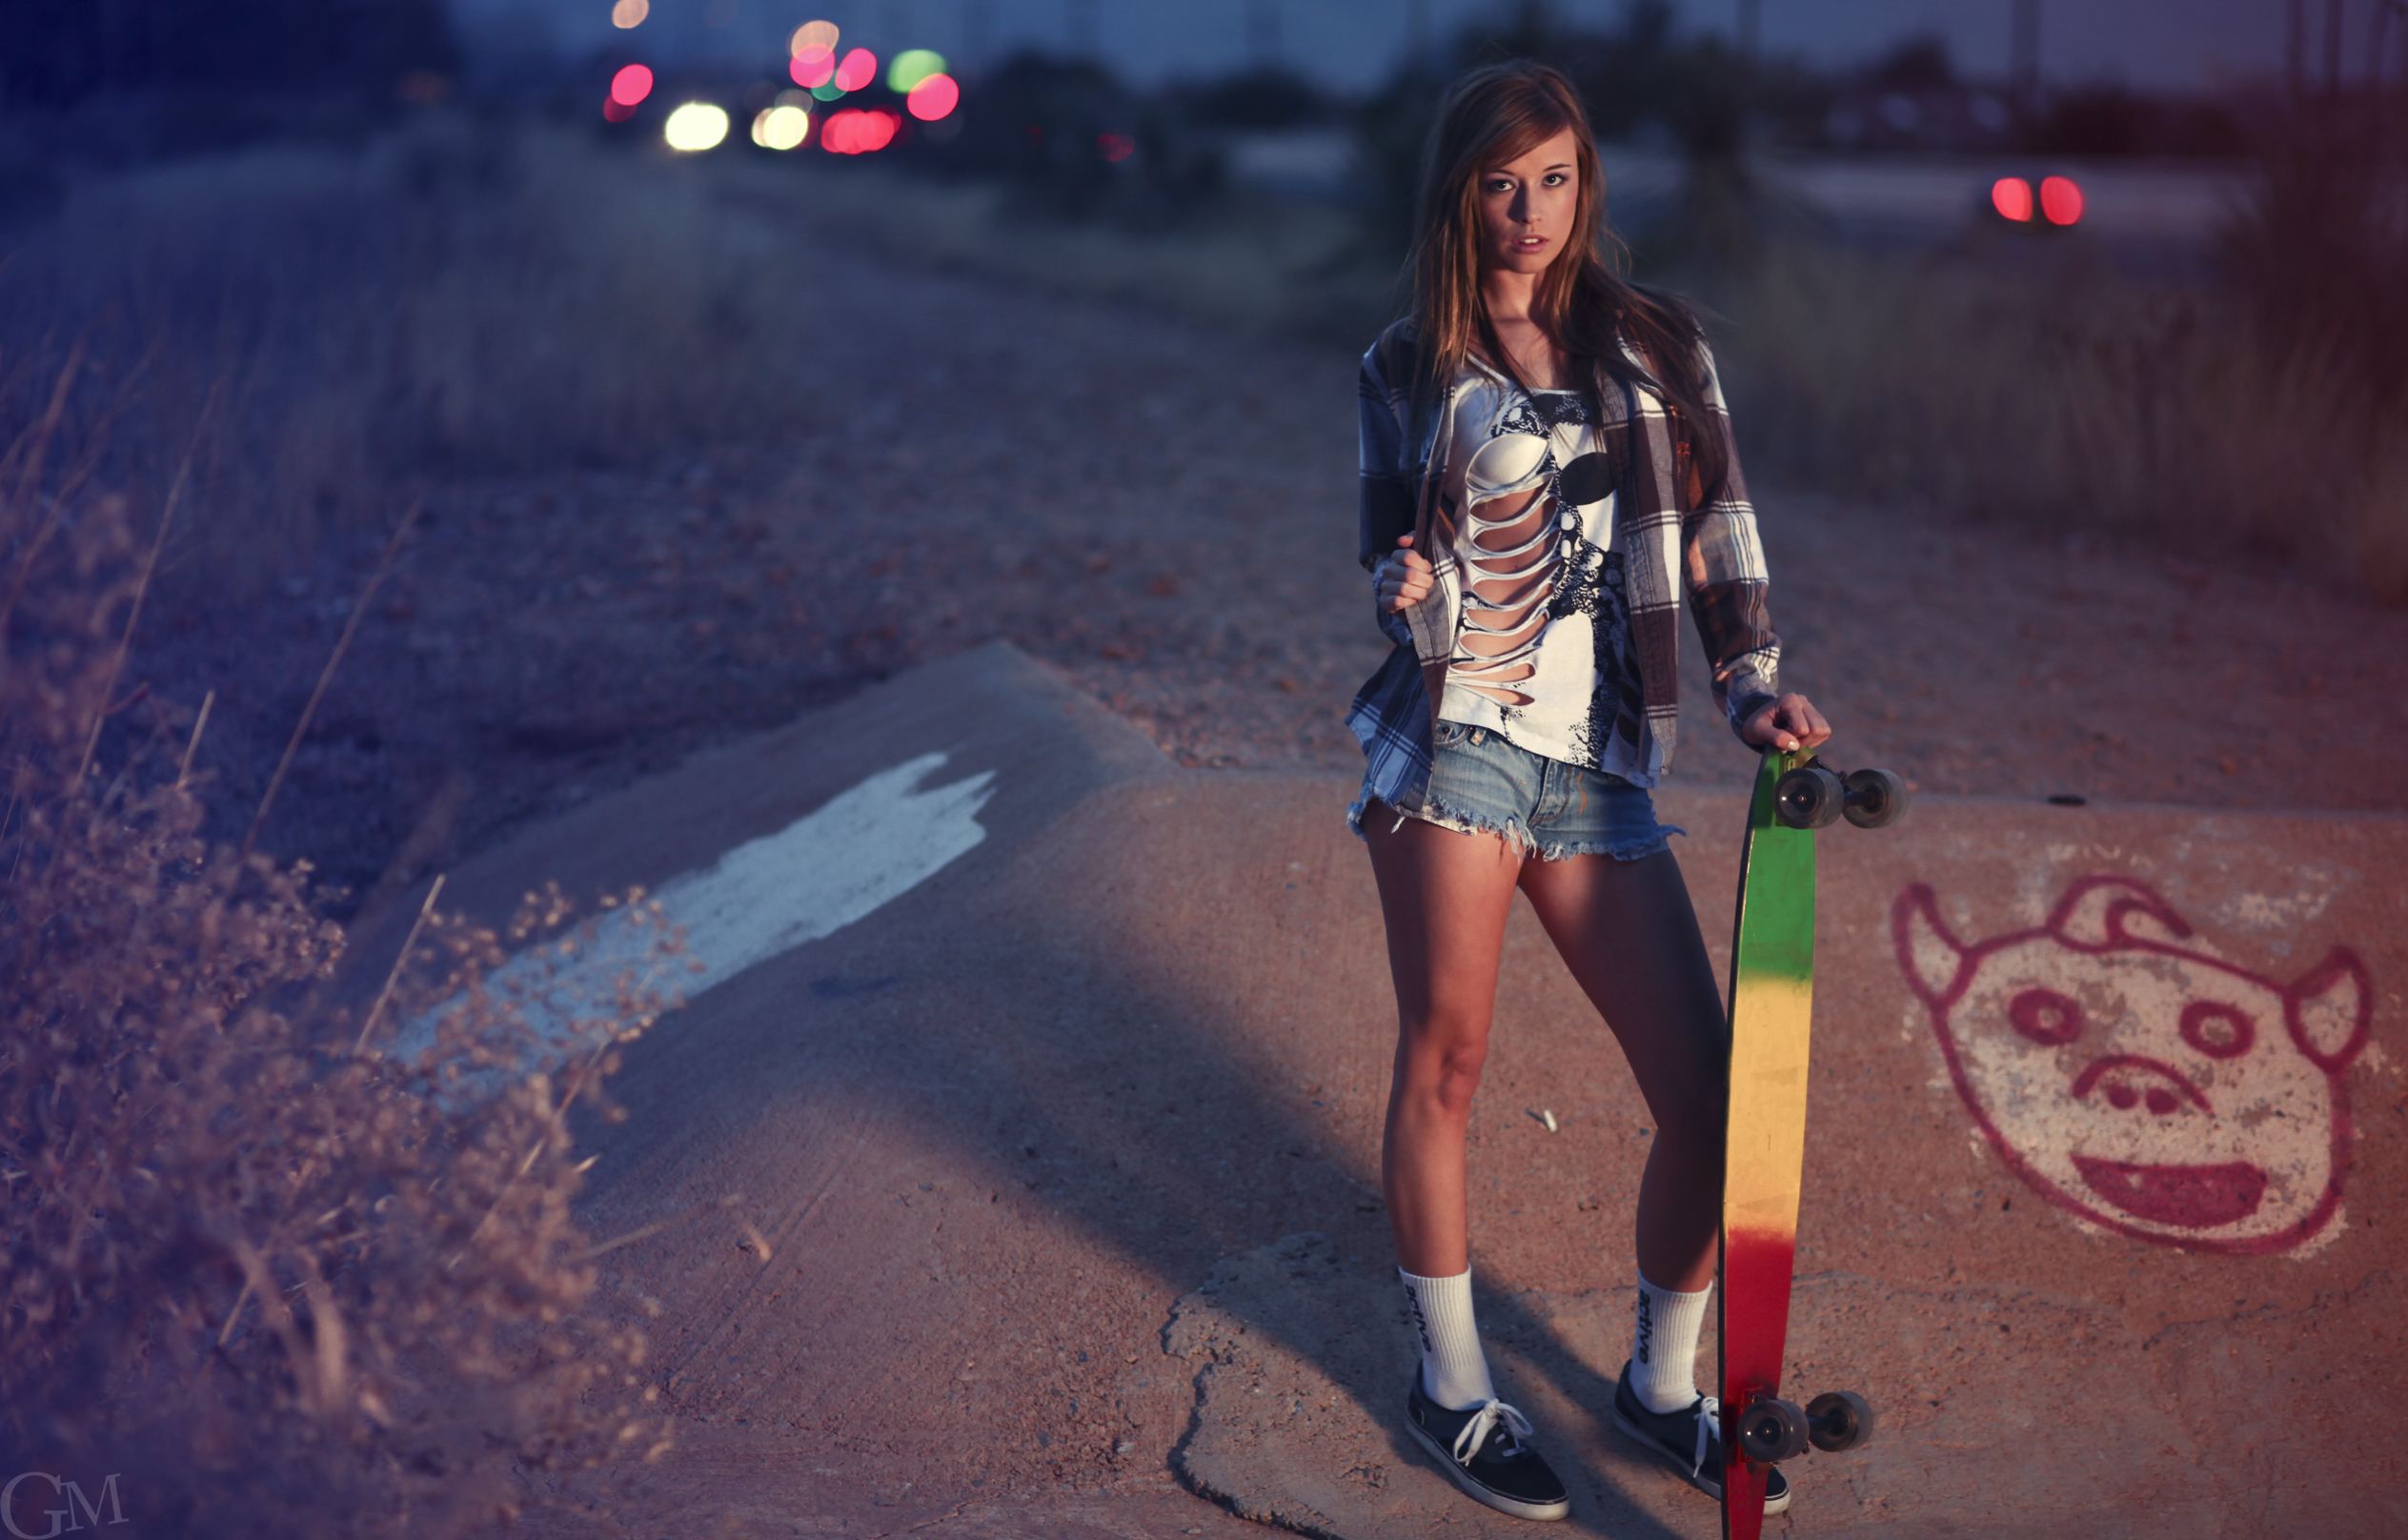 Skater Girl Wallpaper And Image Pictures Photos